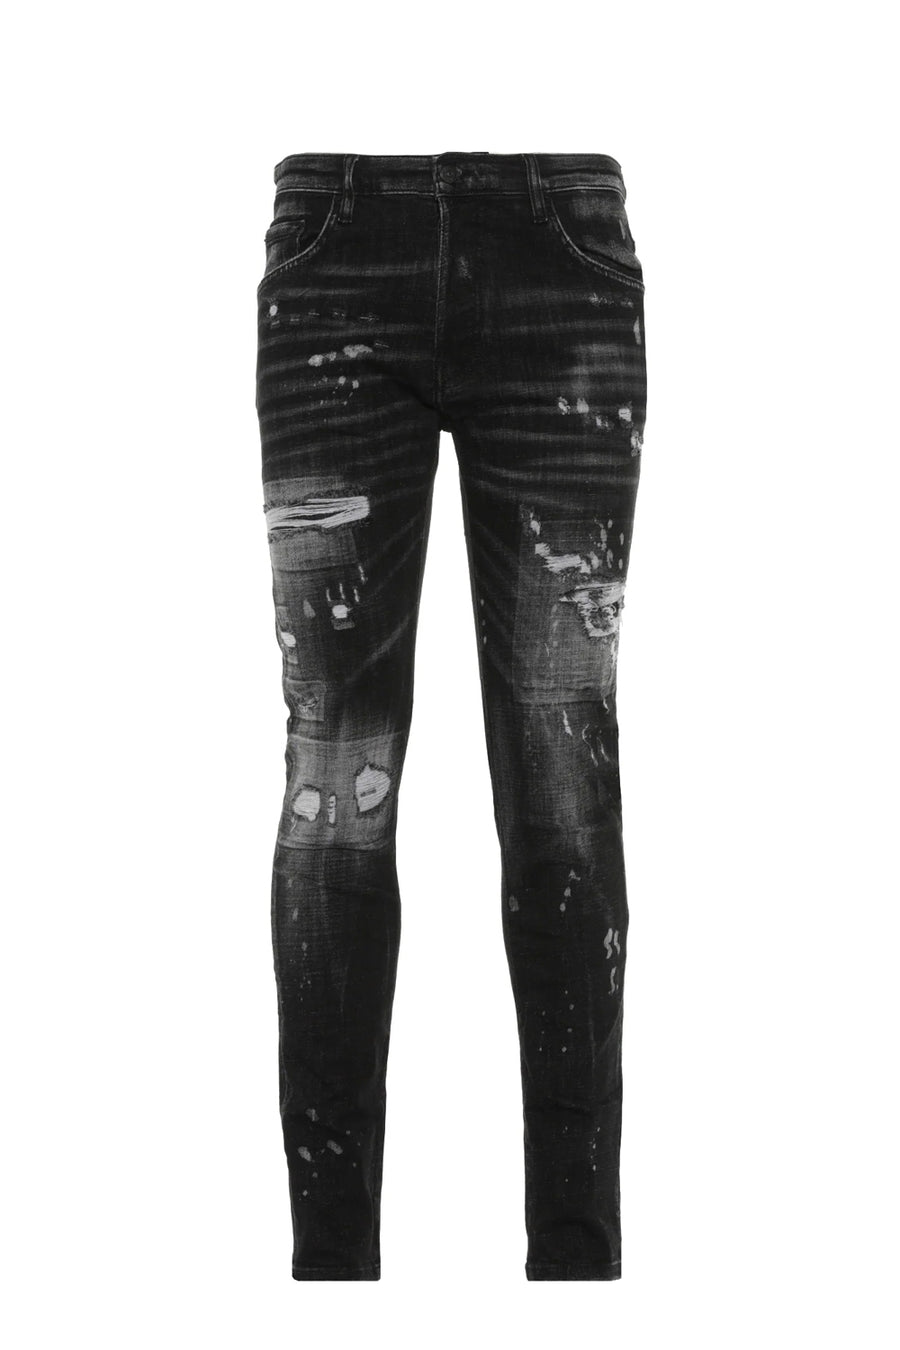 Buy the 7TH HVN S 2767 Jean Black at Intro. Spend £50 for free UK delivery. Official stockists. We ship worldwide.